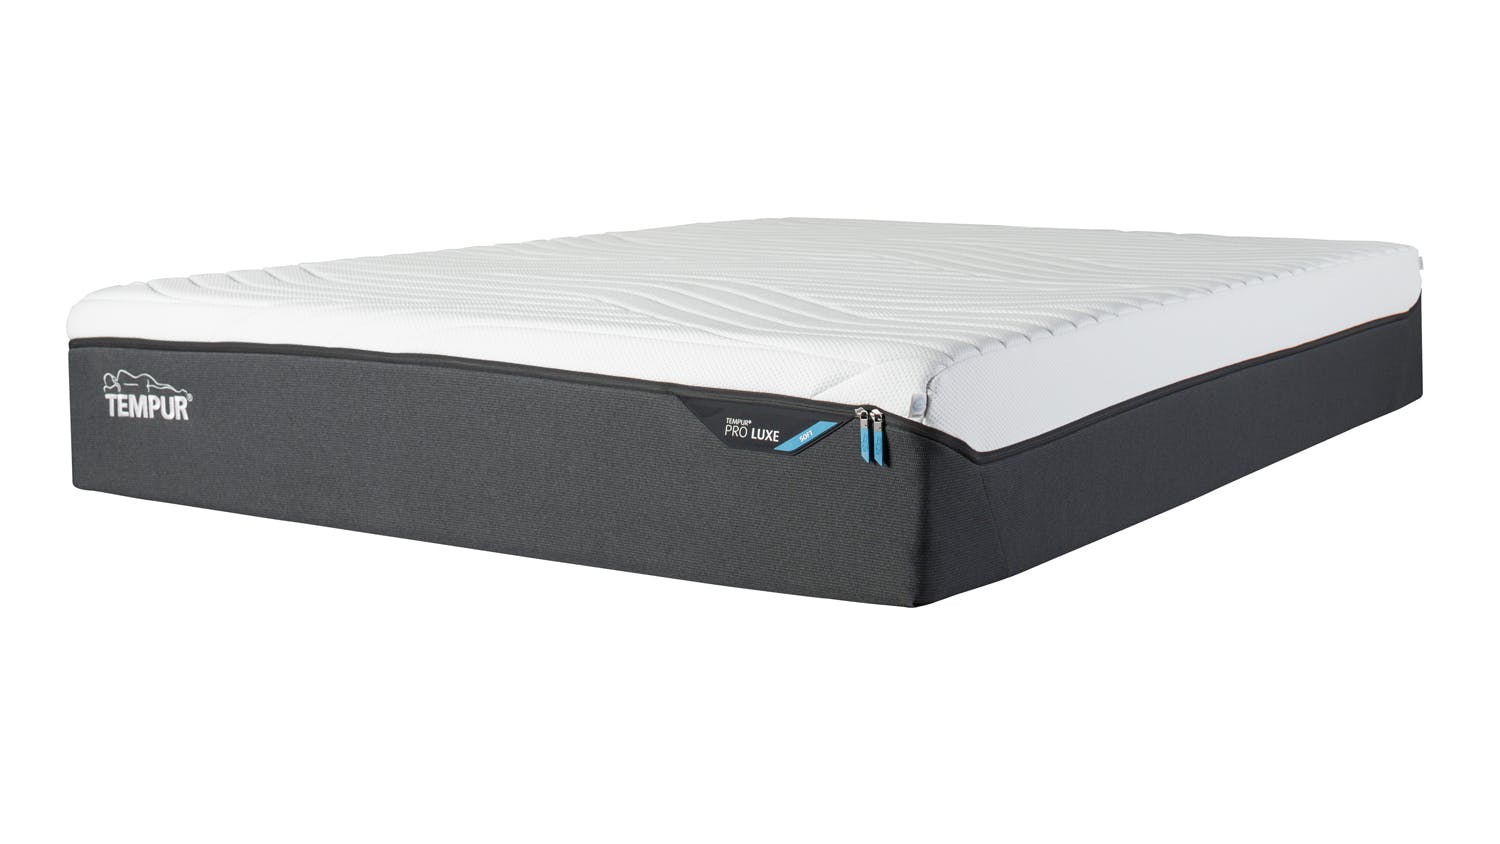 Pro Luxe Dream SmartCool Soft Extra Long Single Mattress by Tempur